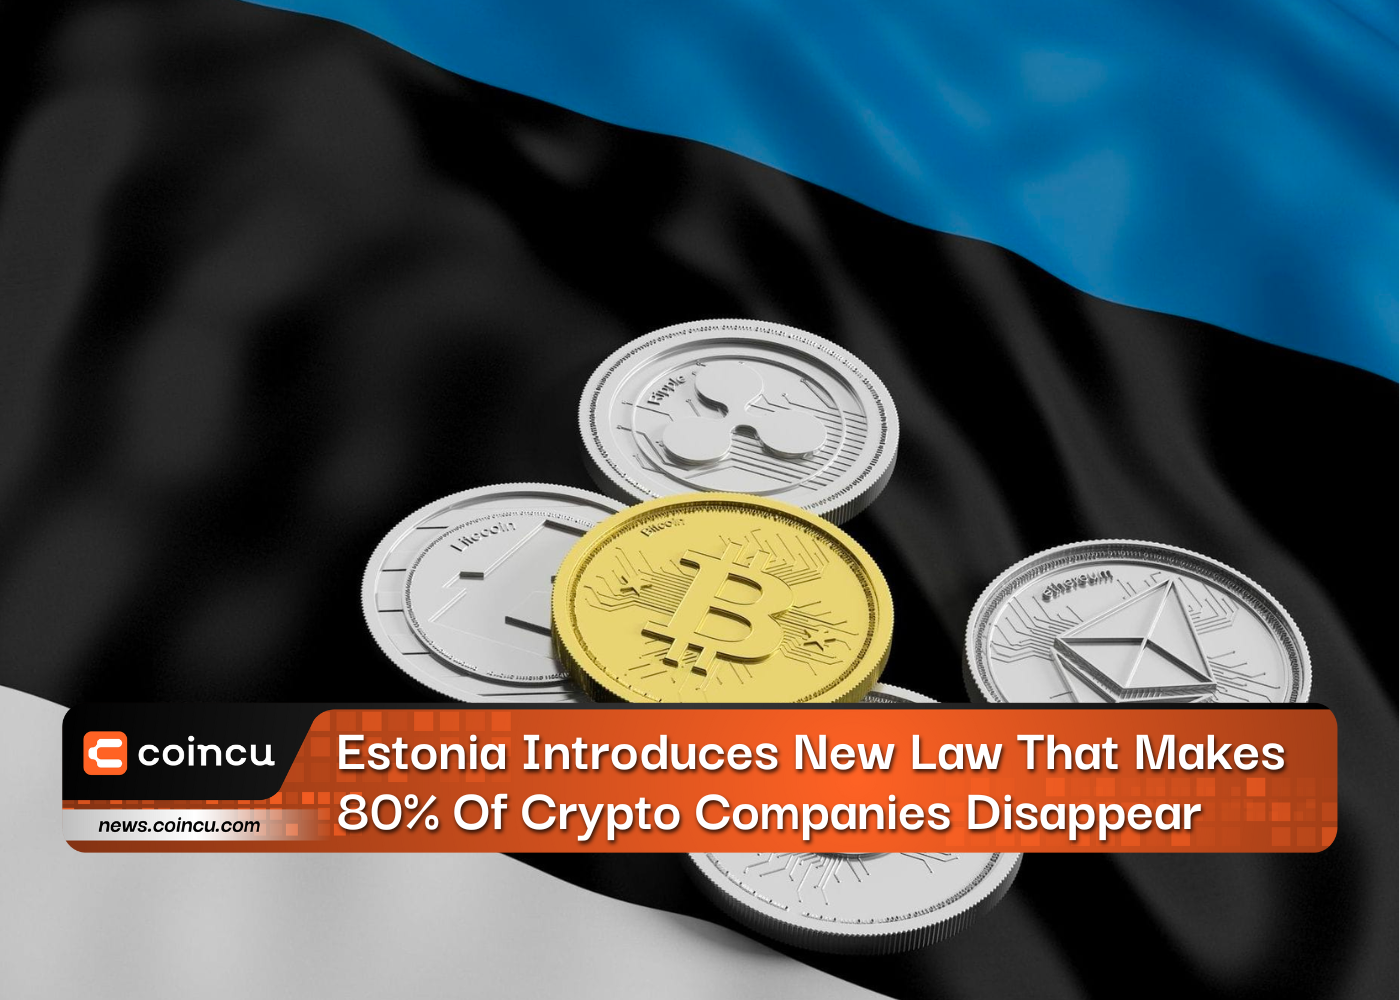 Estonia Introduces New Law That Makes 80% Of Crypto Companies Disappear